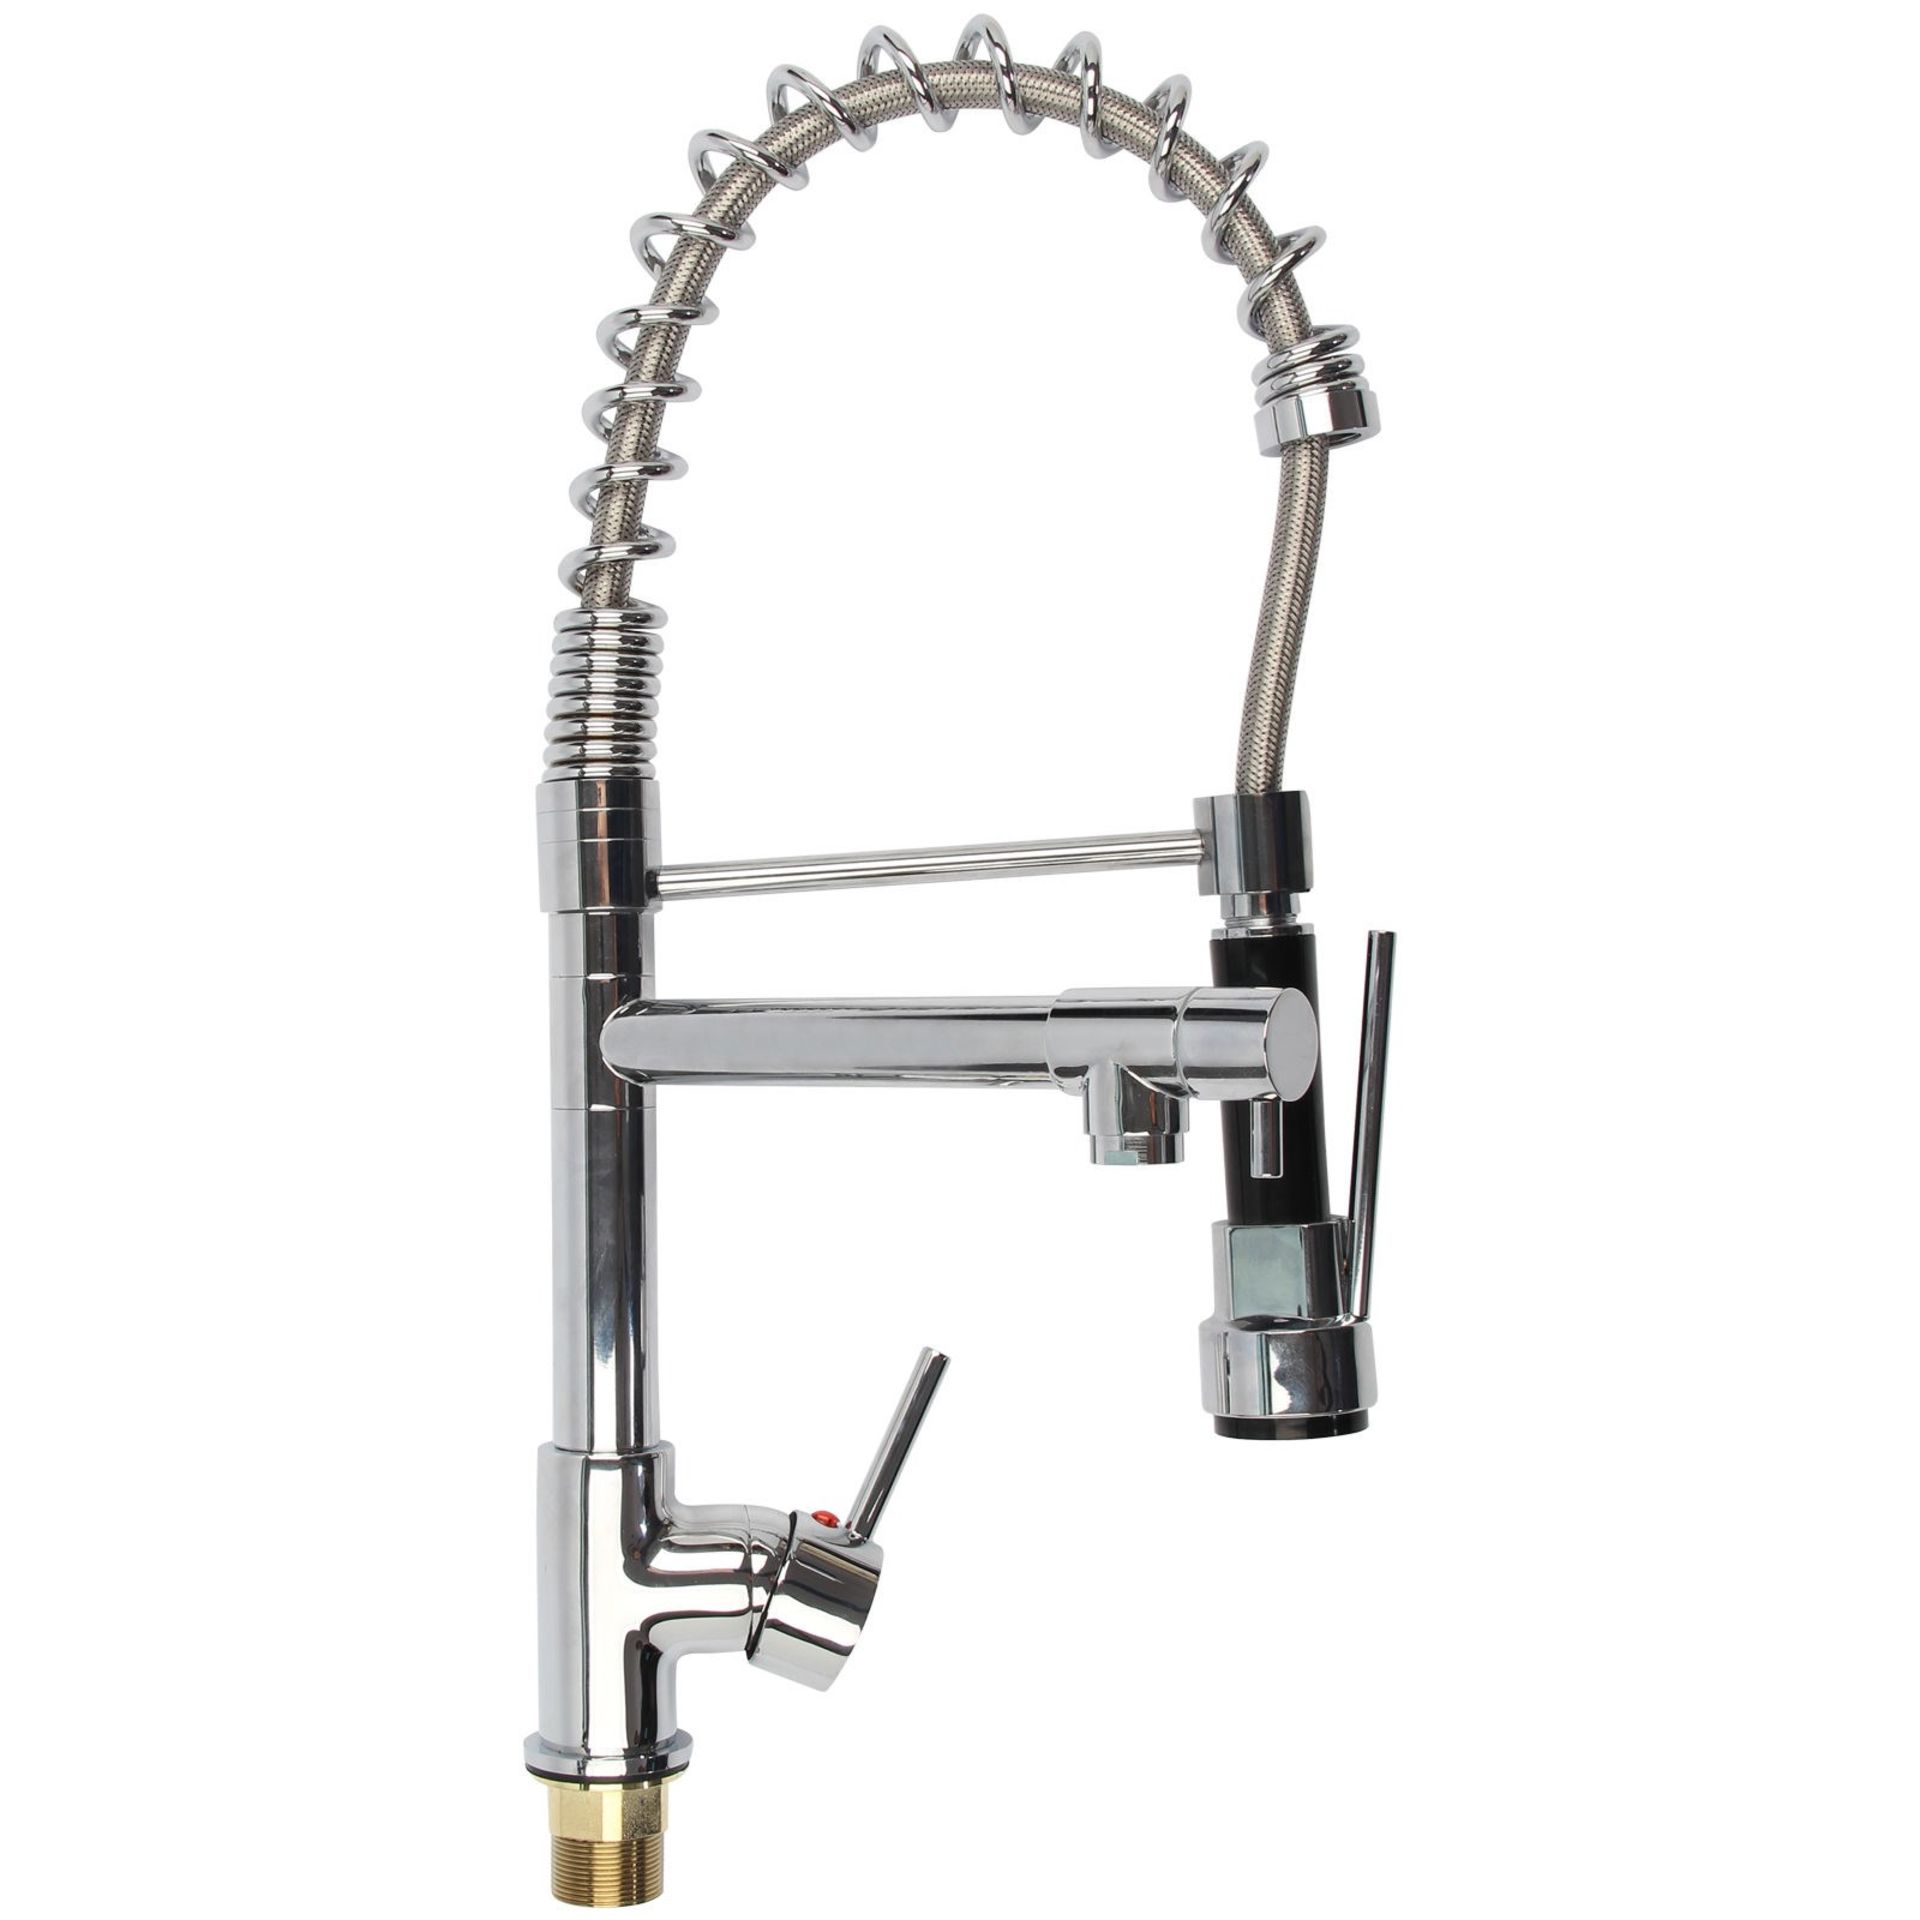 (LP244) Bentley Modern Monobloc Chrome Brass Pull Out Spray Mixer Tap. RRP £349.99. This tap is from - Image 4 of 4